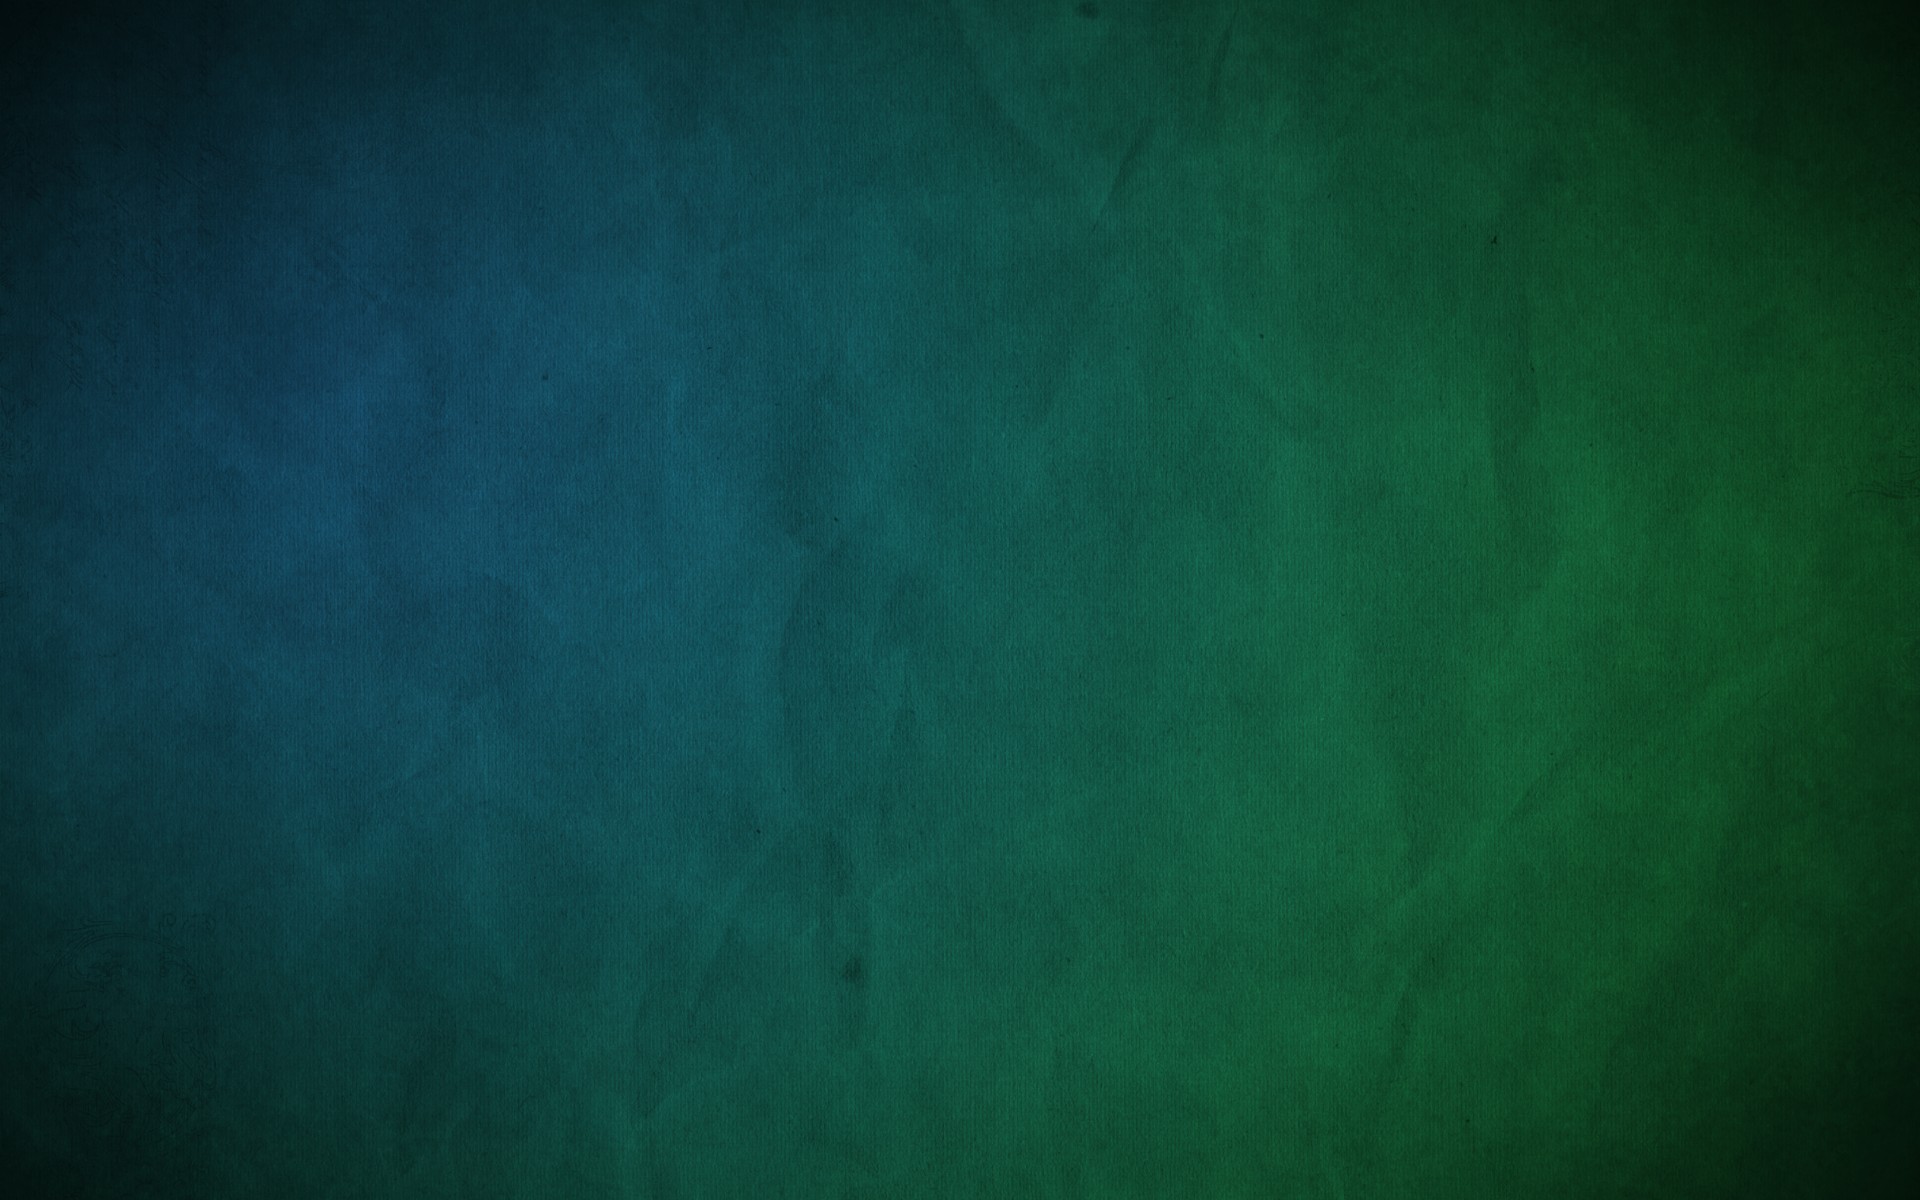 green, Abstract, Paper, Multicolor, Wall, Grunge, Textures, Backgrounds Wallpaper